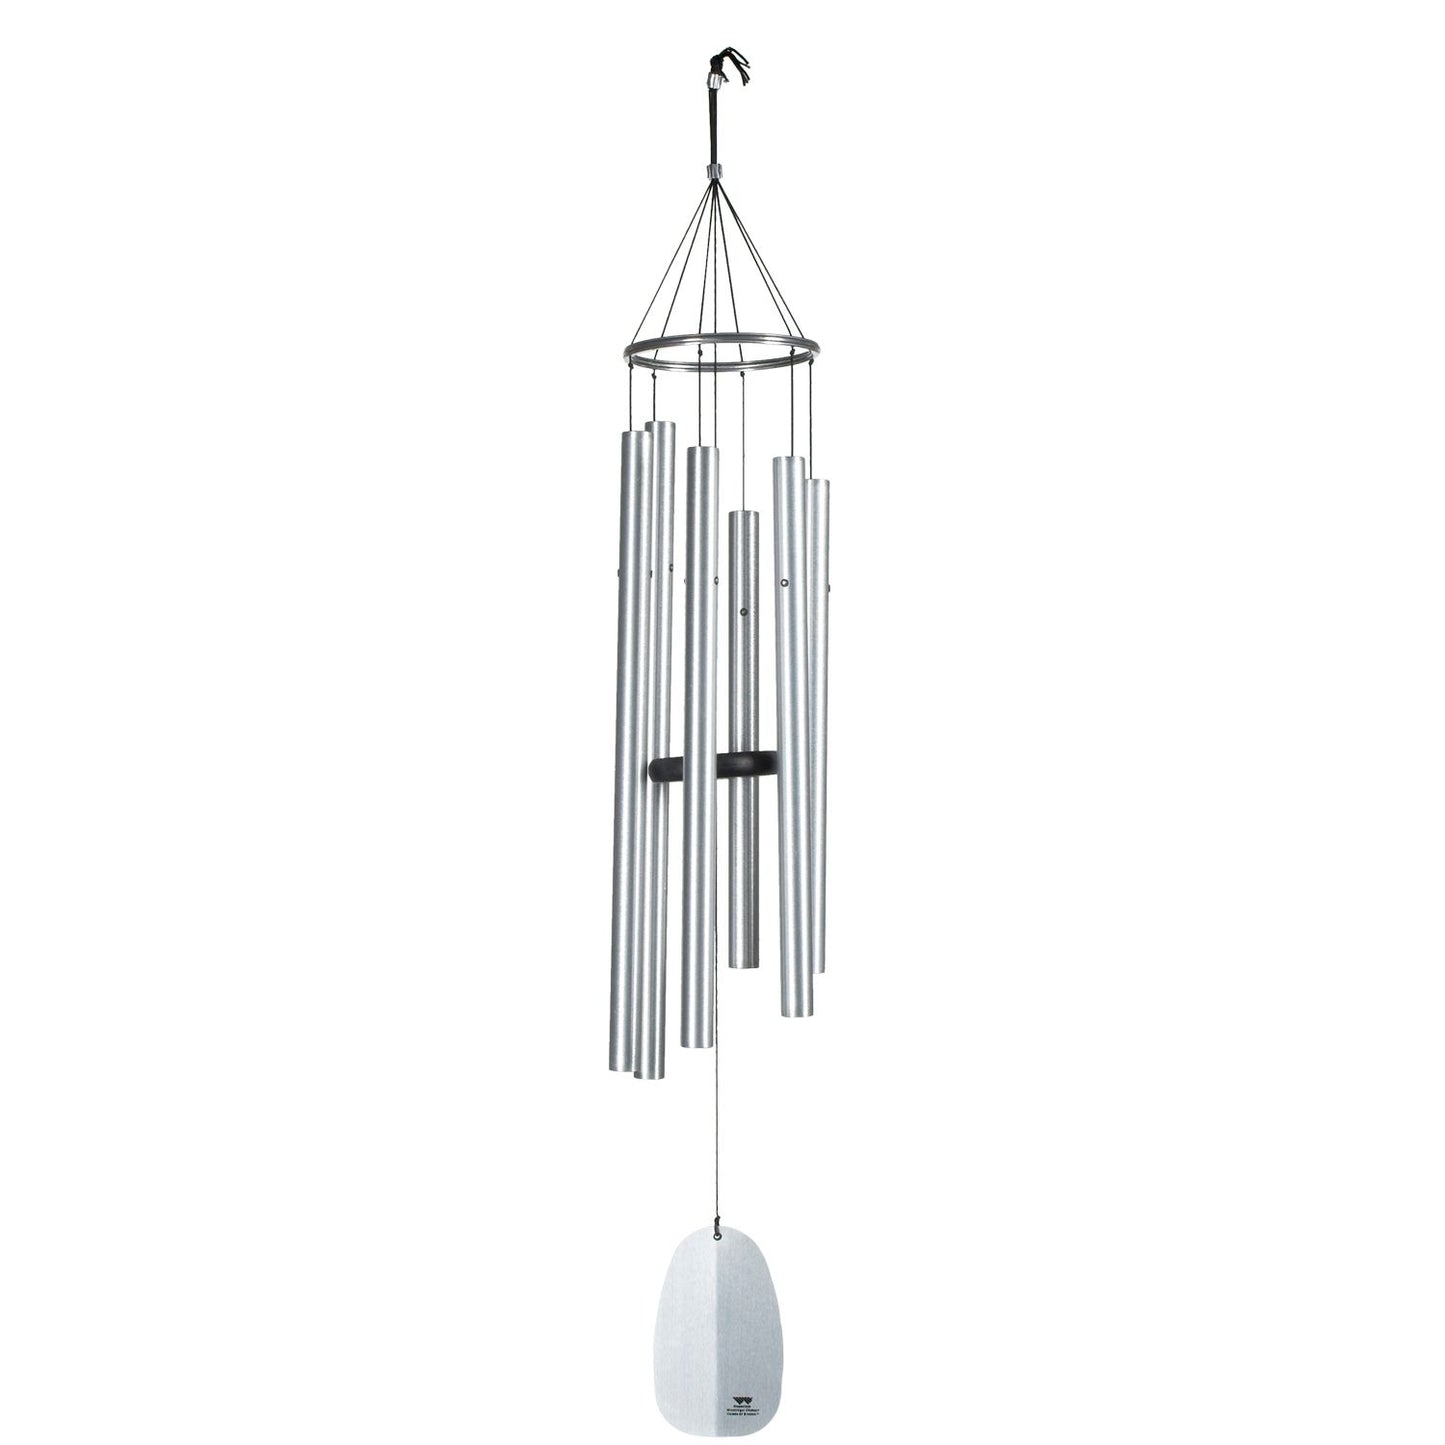 44" Windsinger Chimes of Athena by Woodstock | Outdoor Wind Chimes | Housewarming Gifts | Gifts for Mom